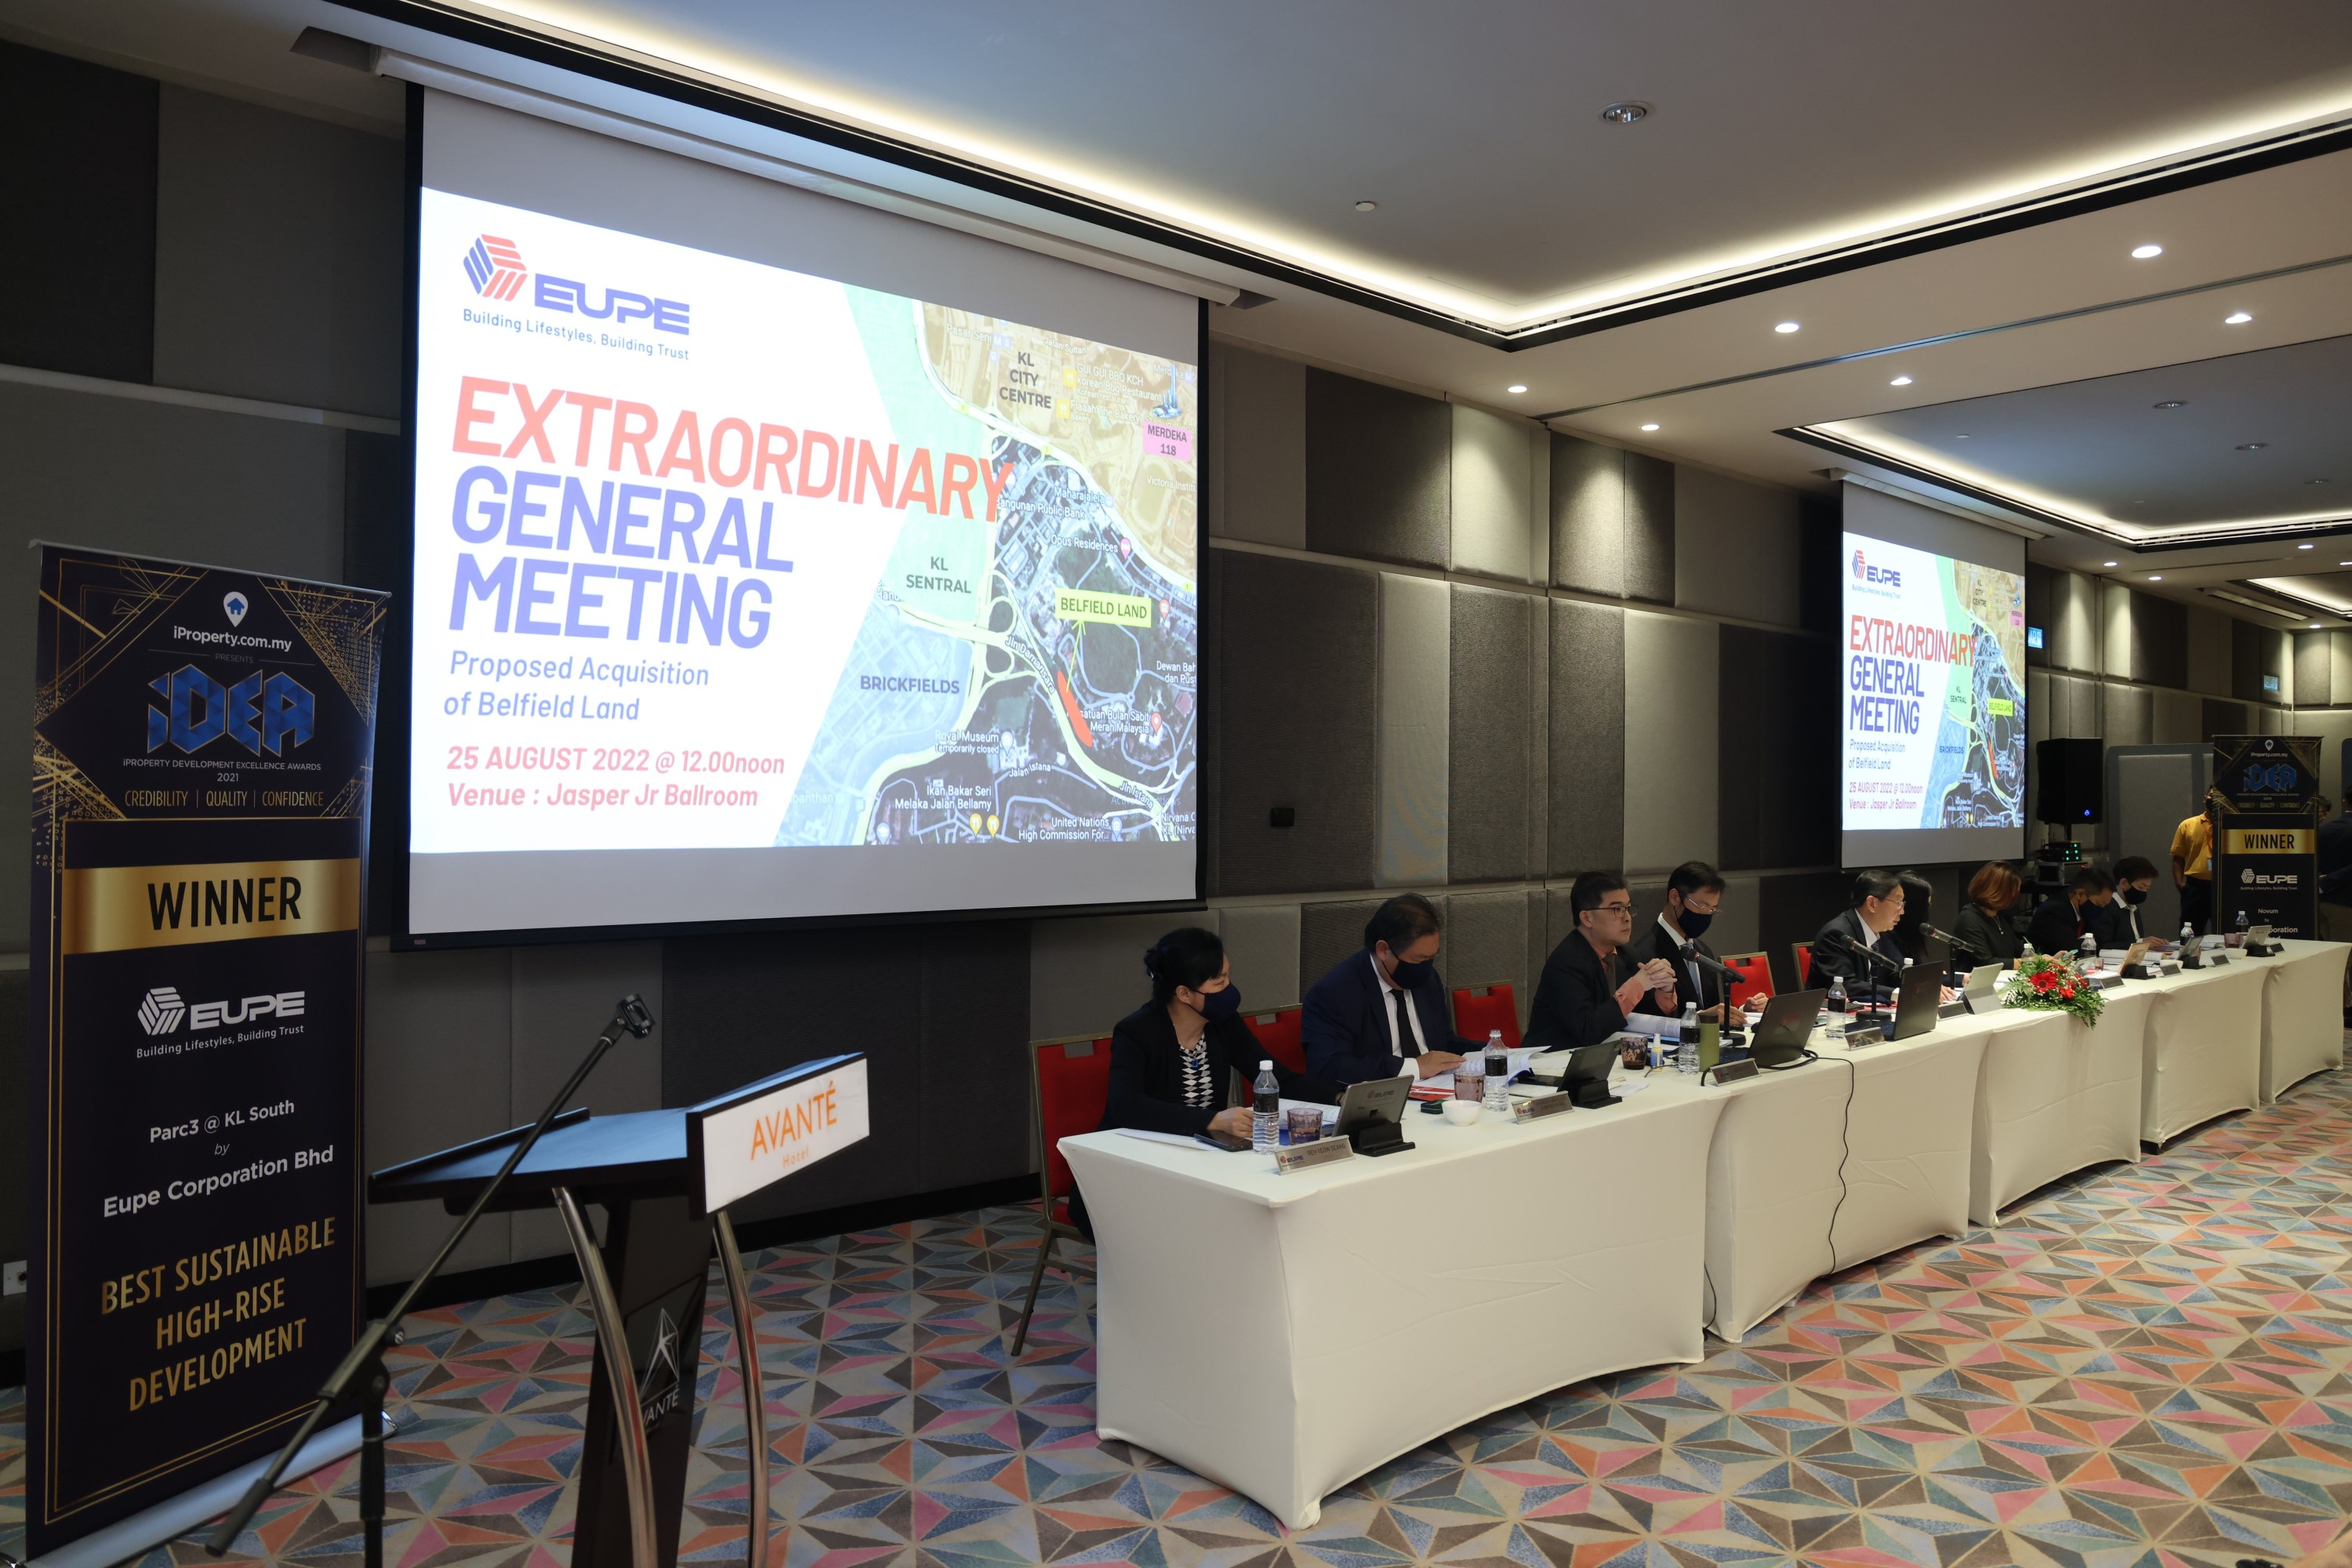 Eupe's Annual General Meeting and Extraordinary General Meeting